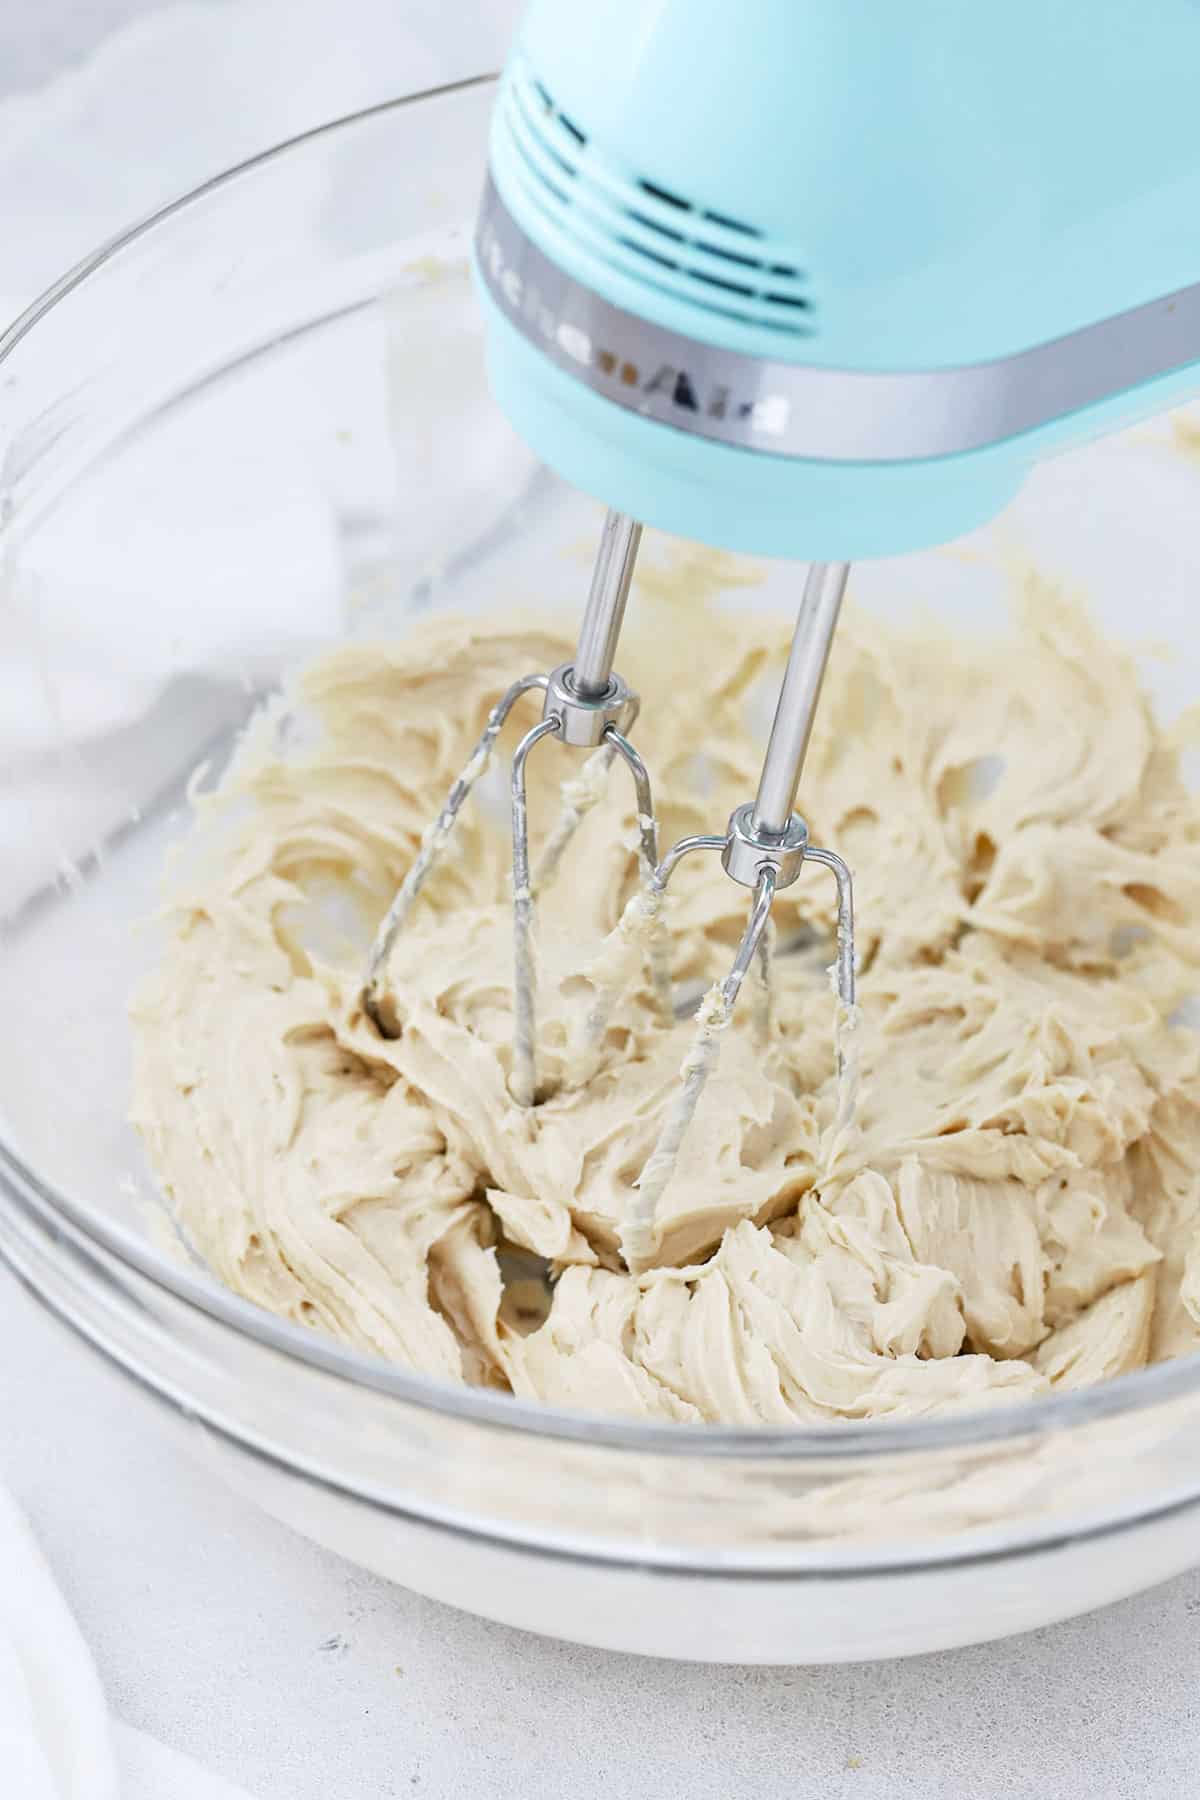 Beating whipped cream cheese frosting